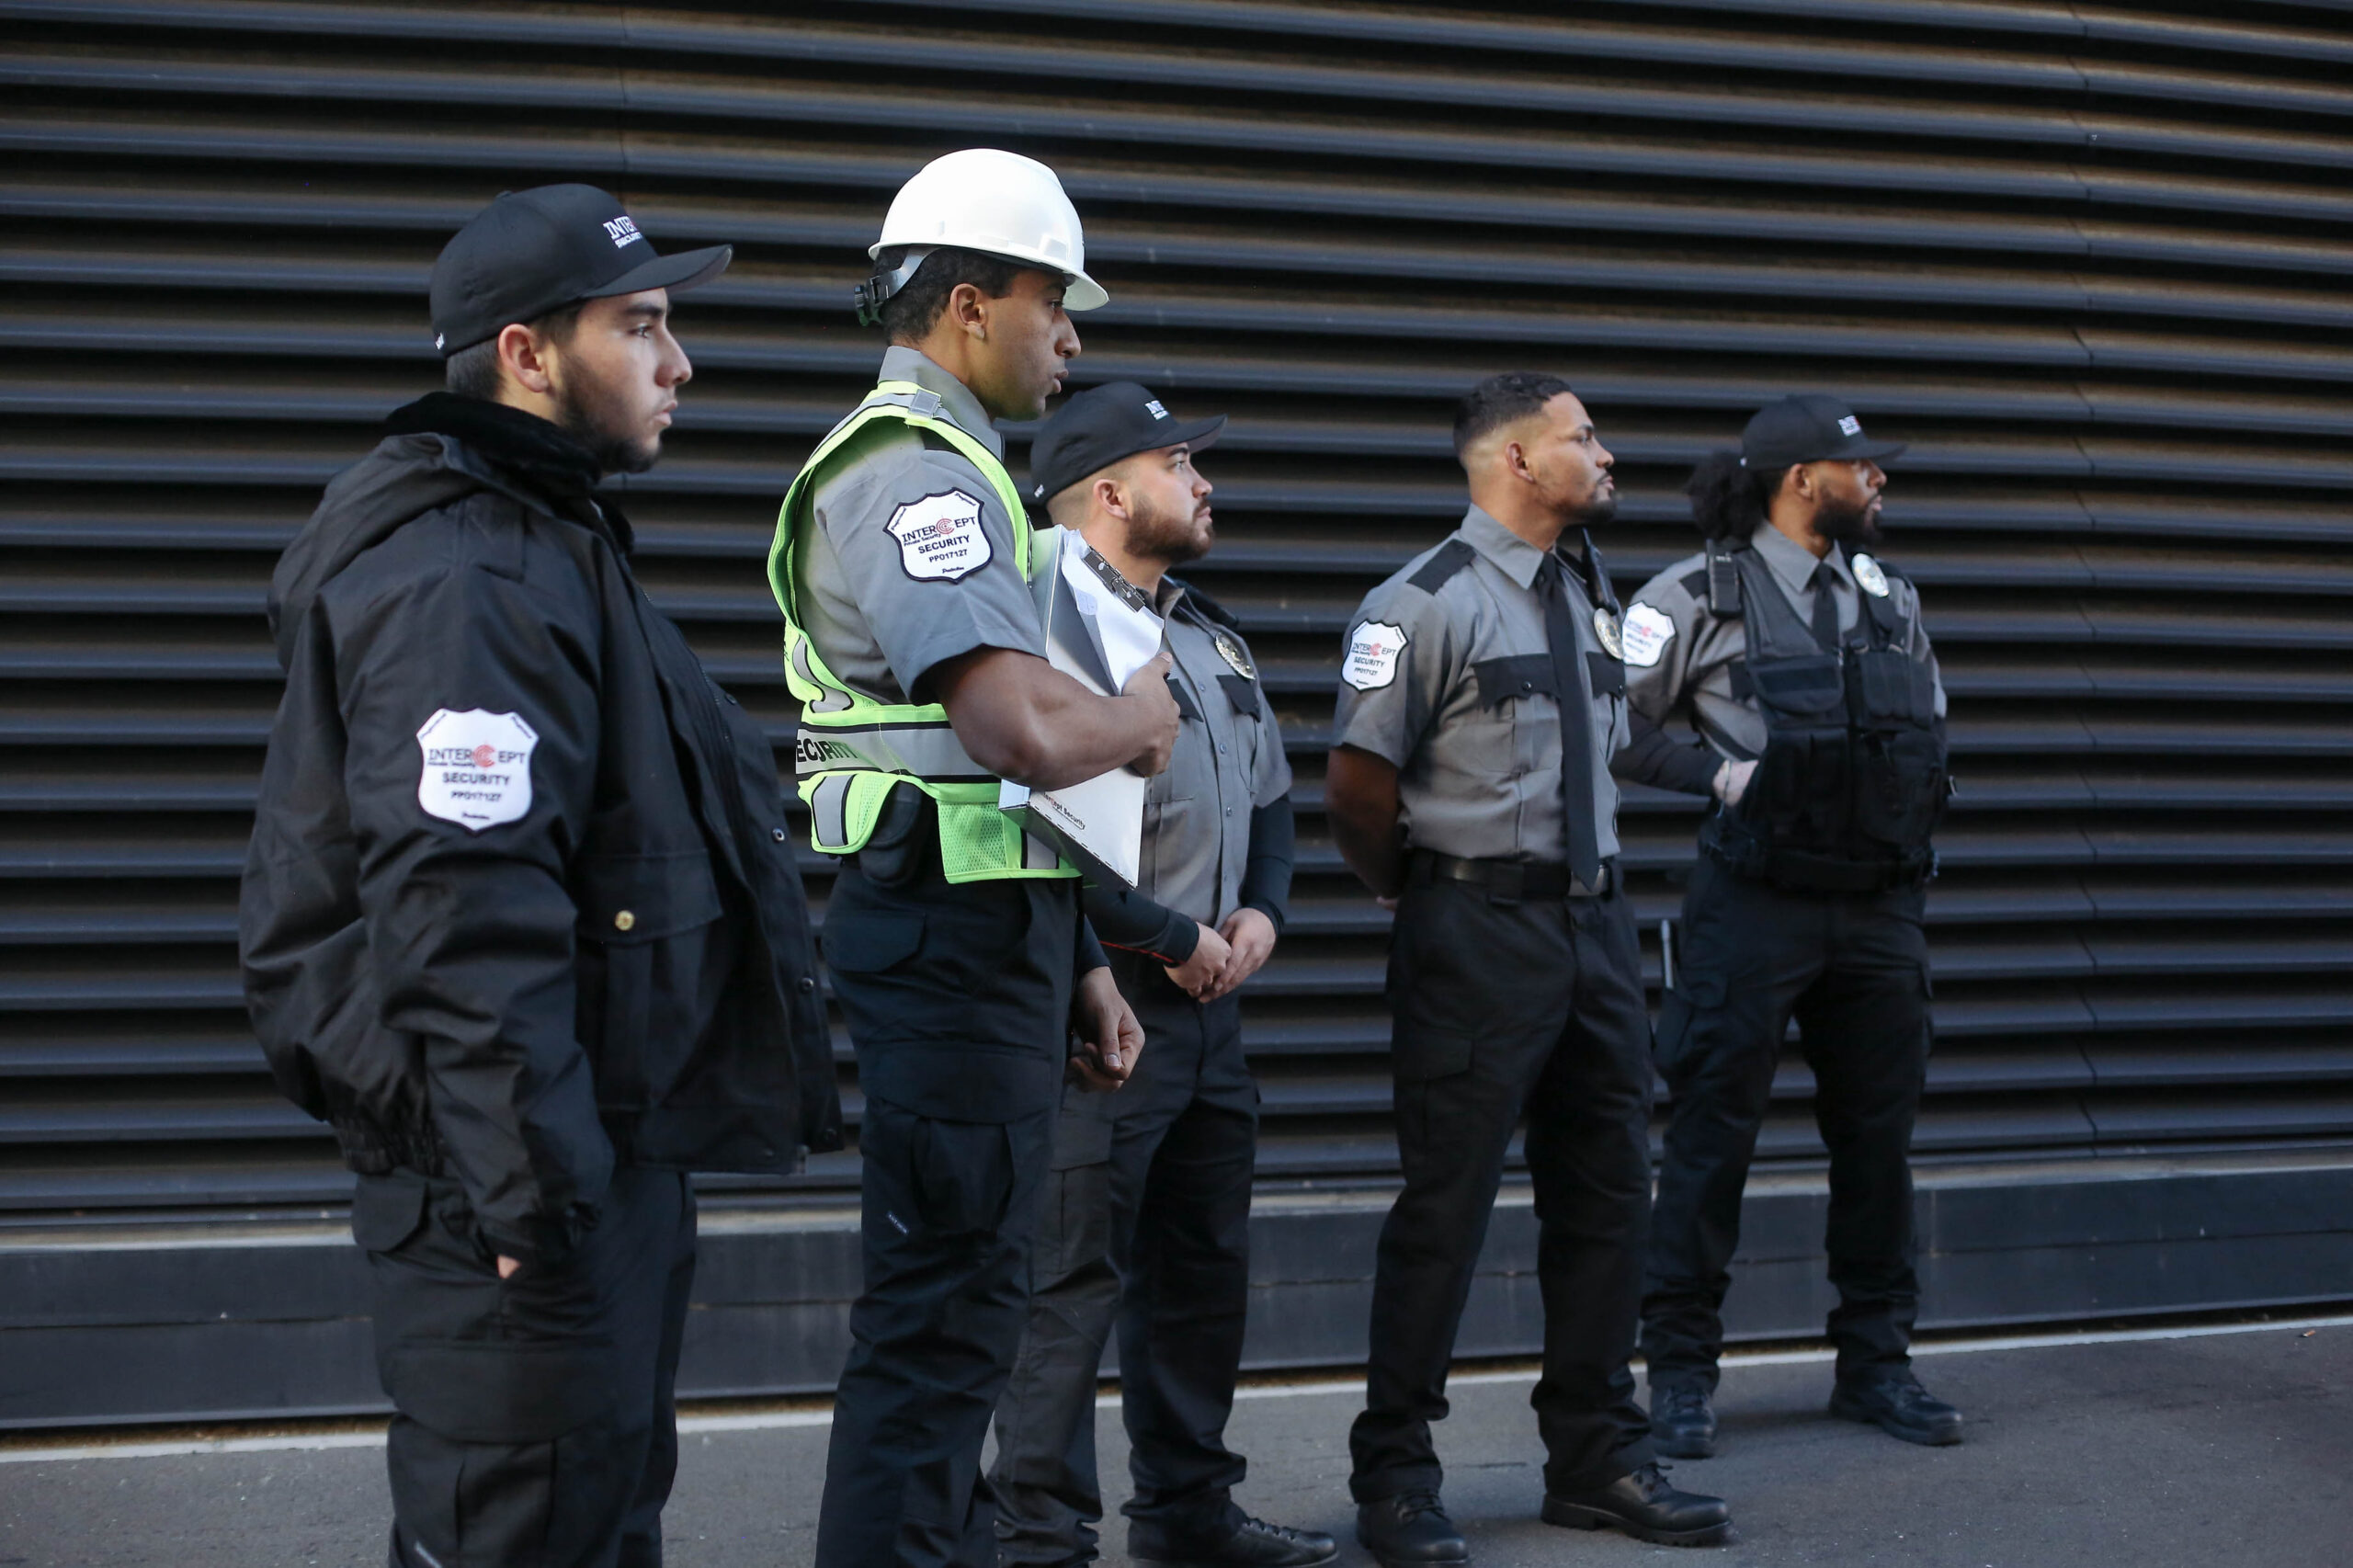 Group of uniformed Intercept Security guards on watch next to a building